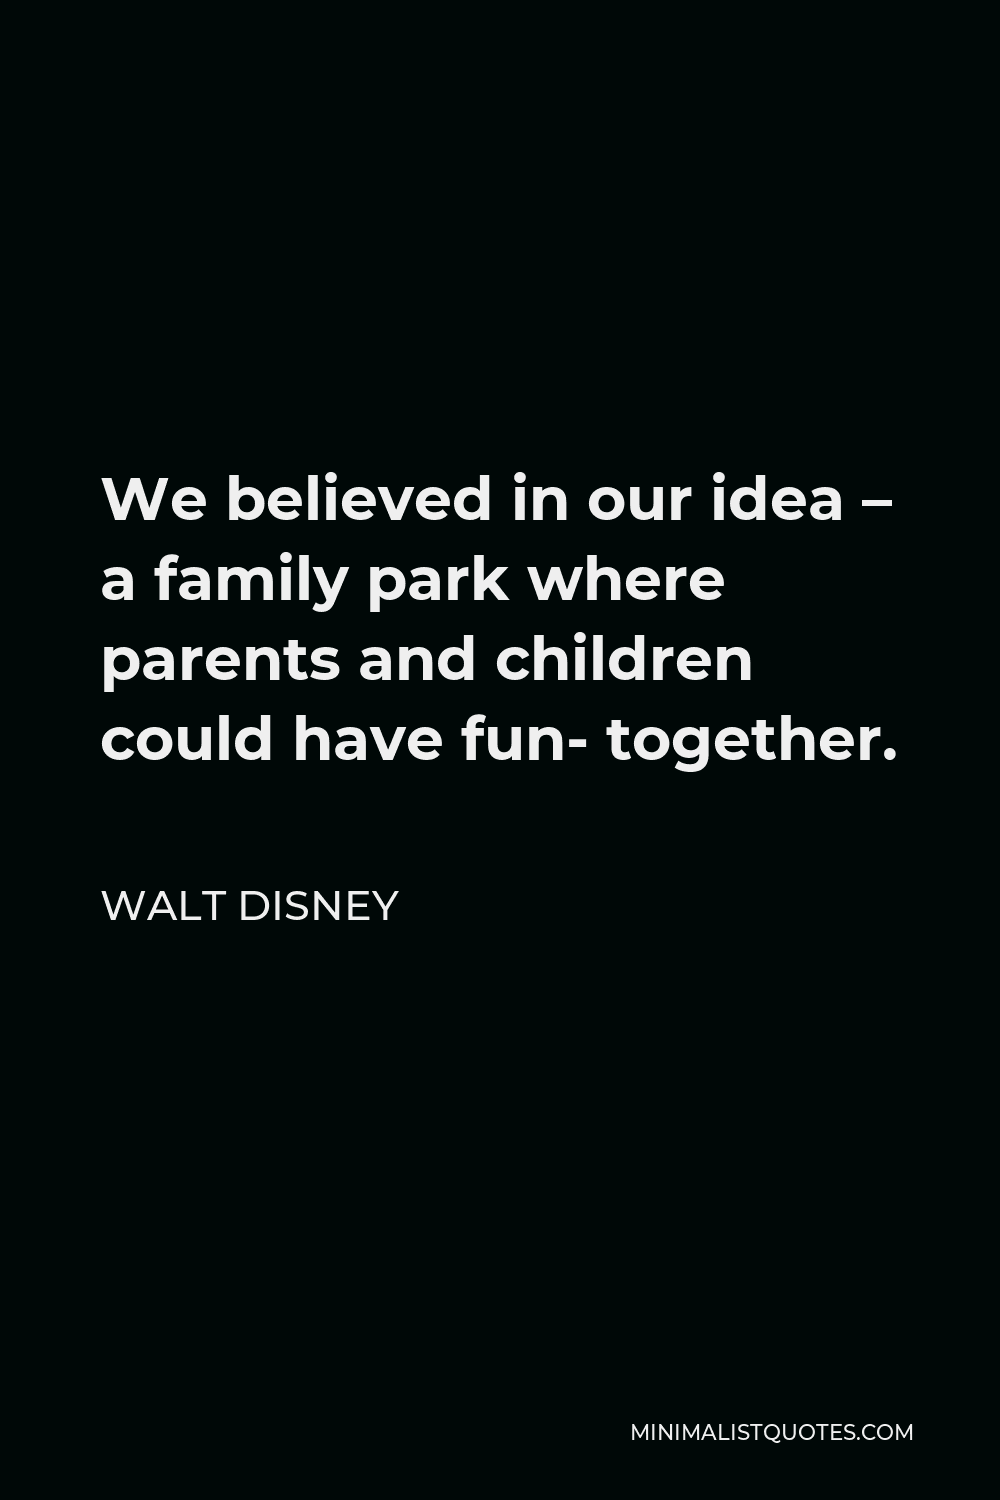 Walt Disney Quote - We believed in our idea – a family park where parents and children could have fun- together.